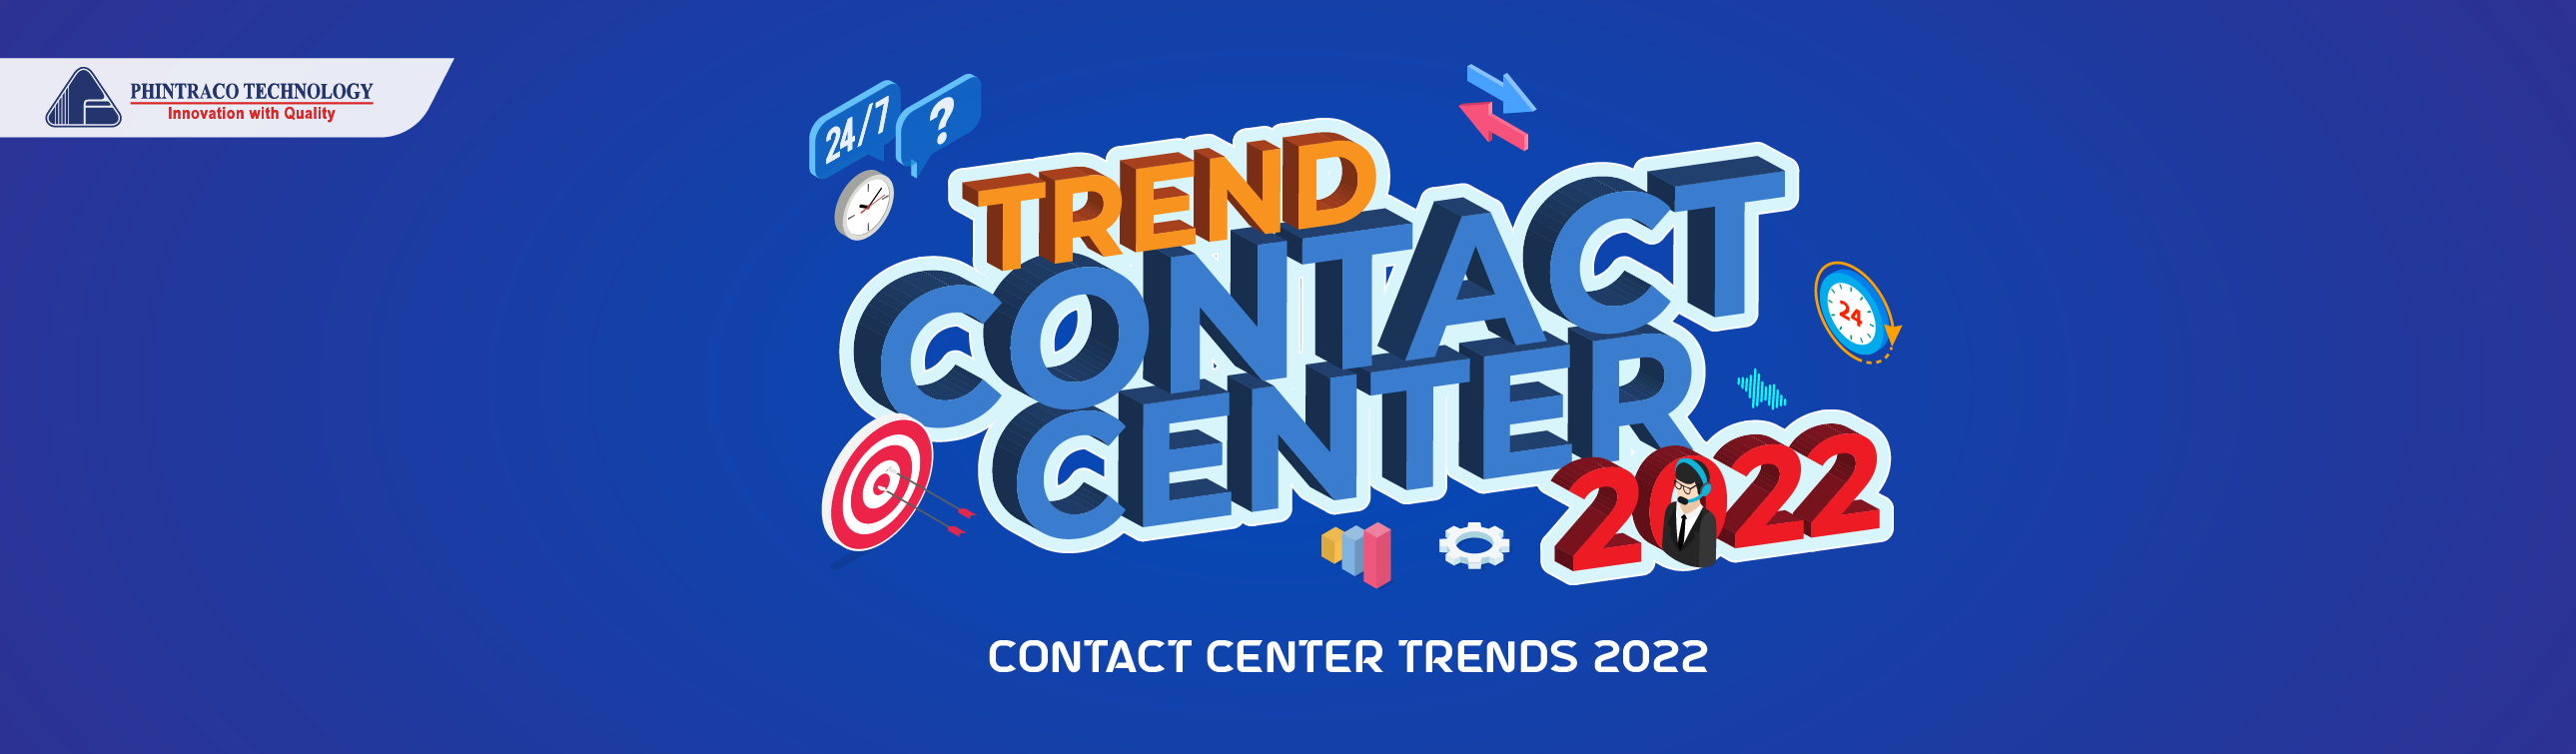 Contact Center Trends 2022: Utilizing Technology to Improve Contact Center Performance